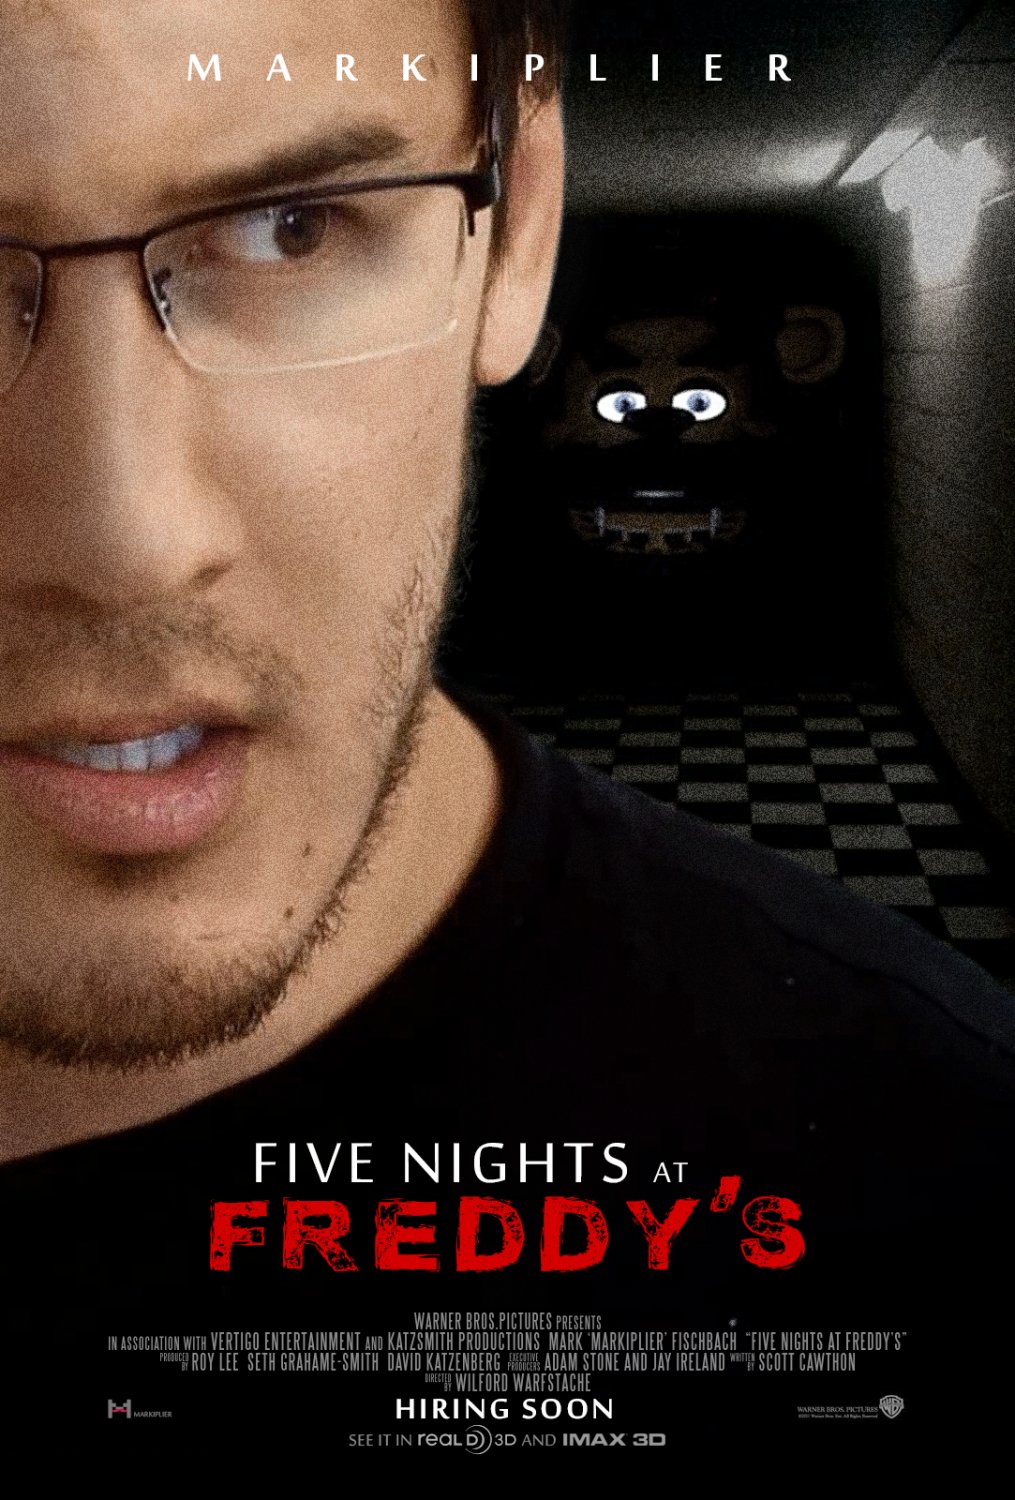 Five Nights At Freddys Movie Release Date Reverasite